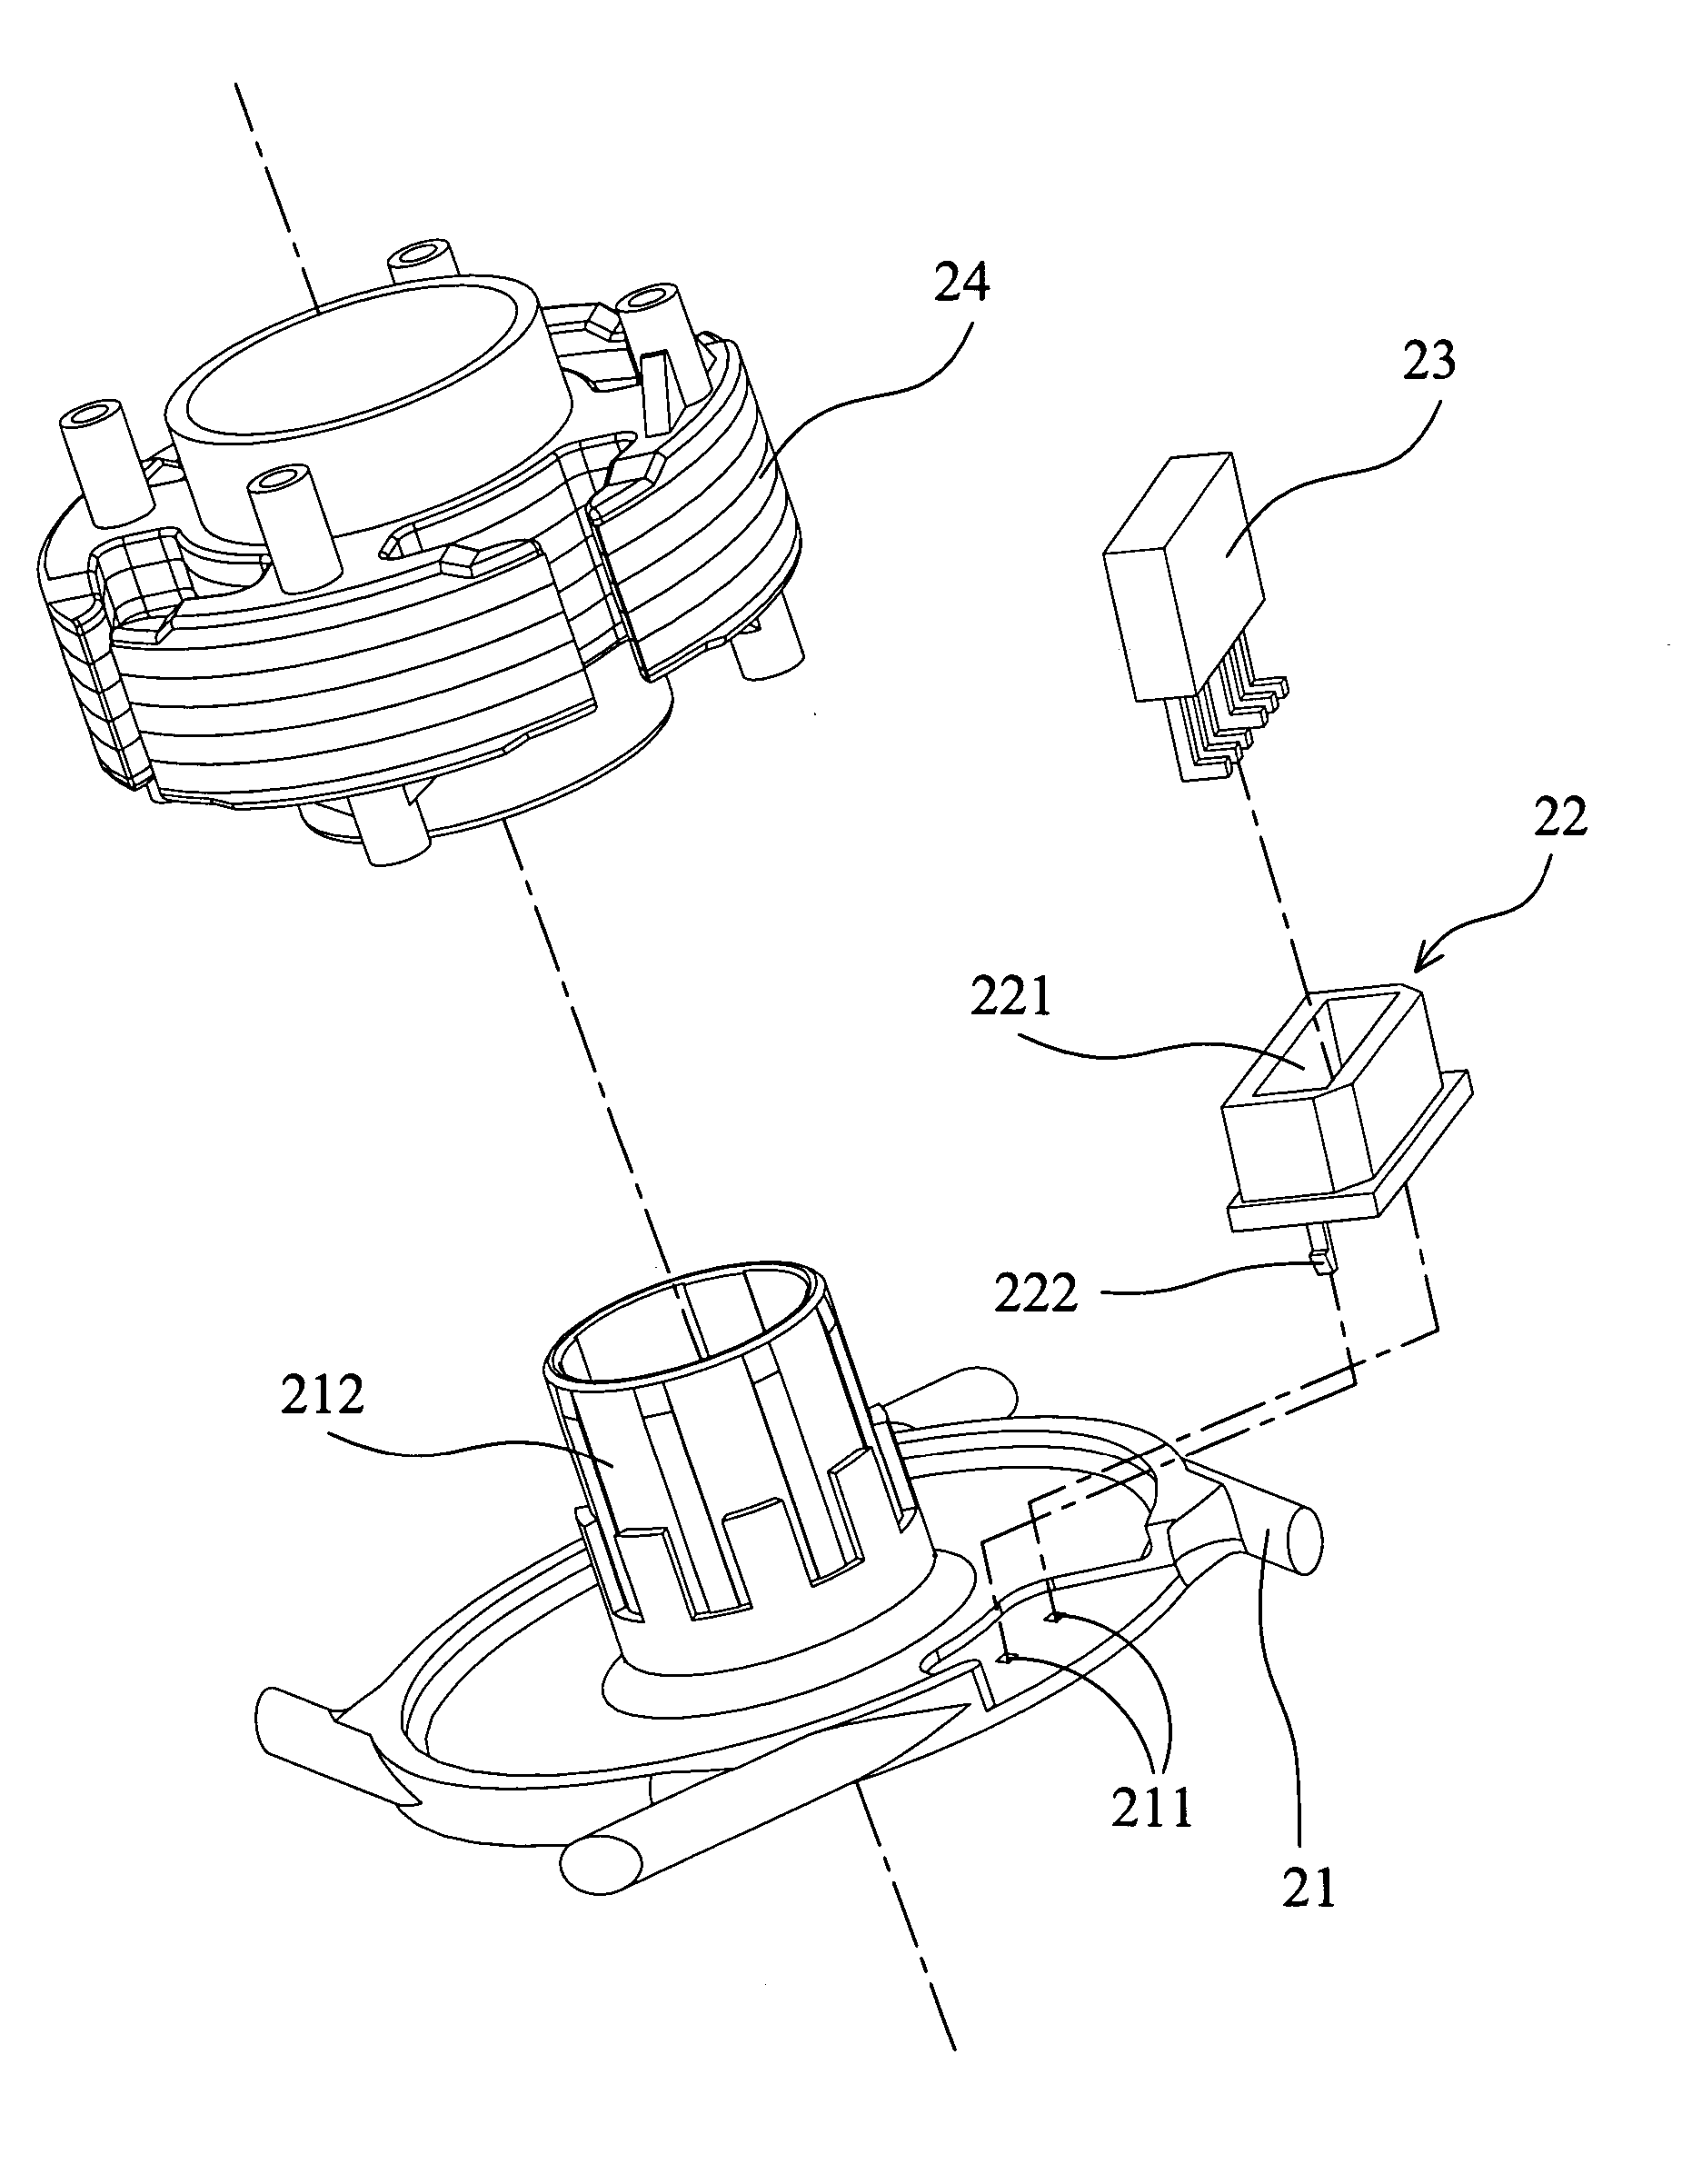 Mounting structure for motor controller of heat-dissipating device